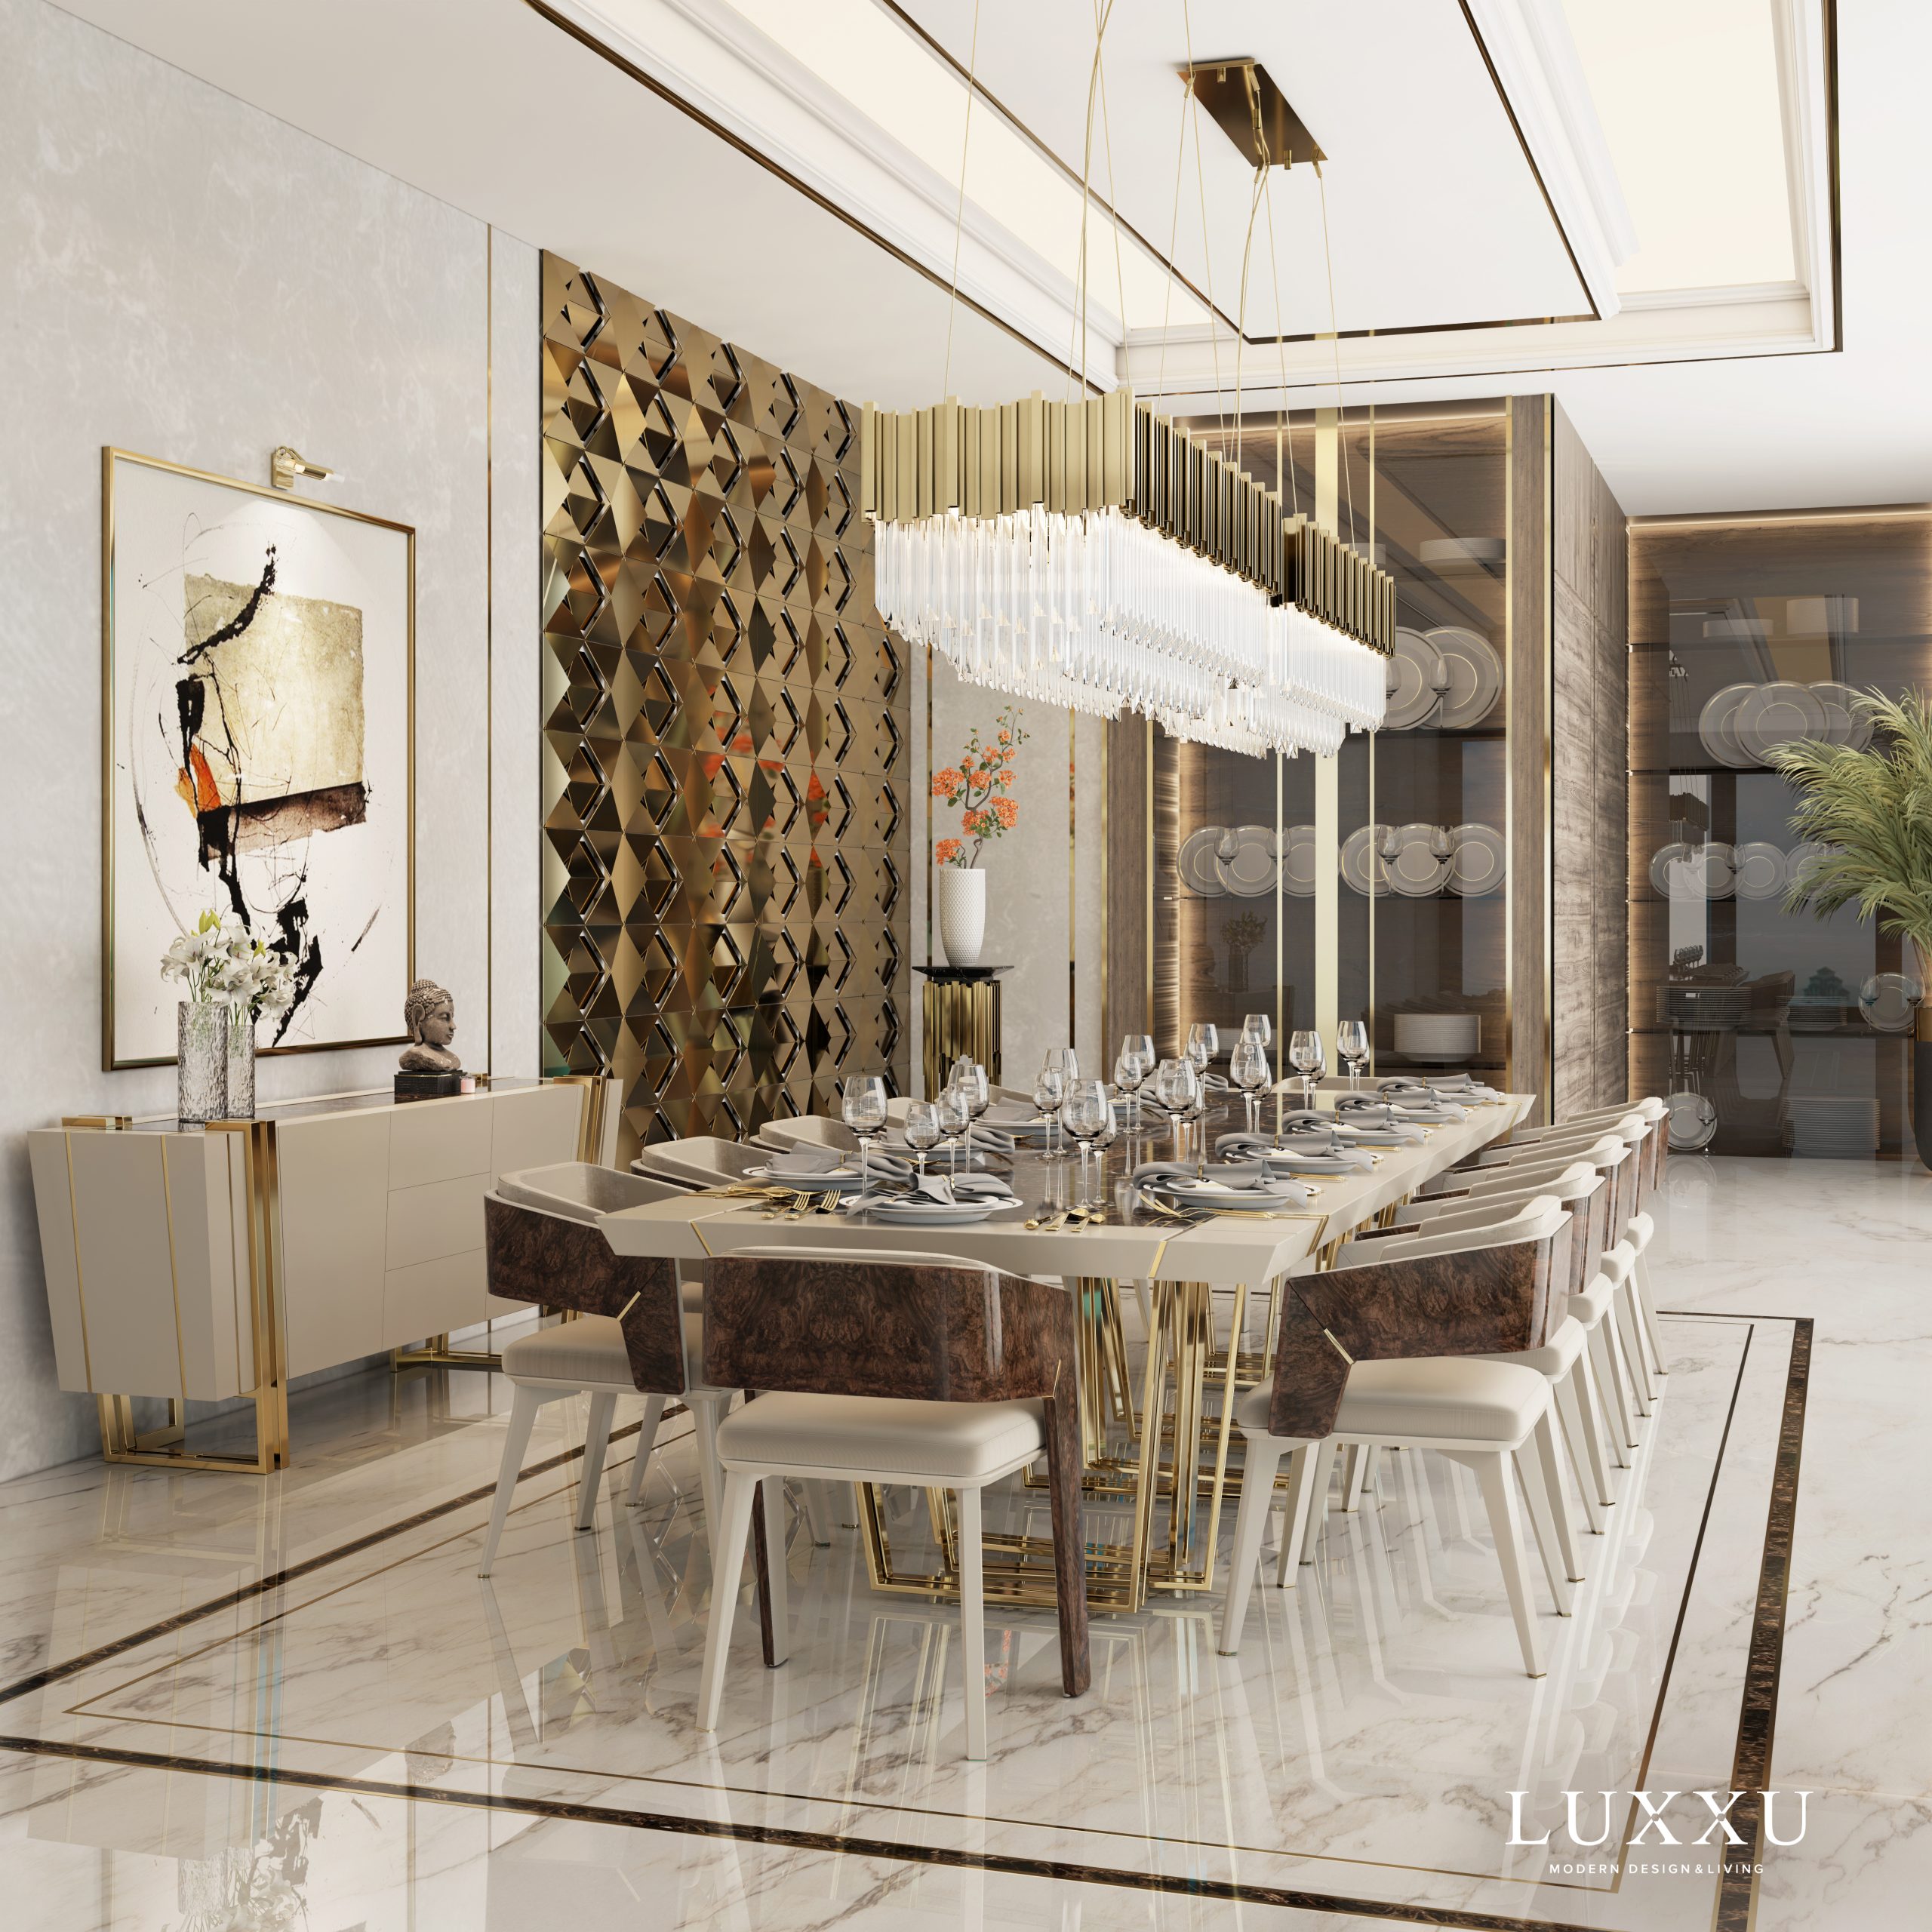 Dining Room Design – The Best Dining Space In Kuala Lumpur   Luxxu ...